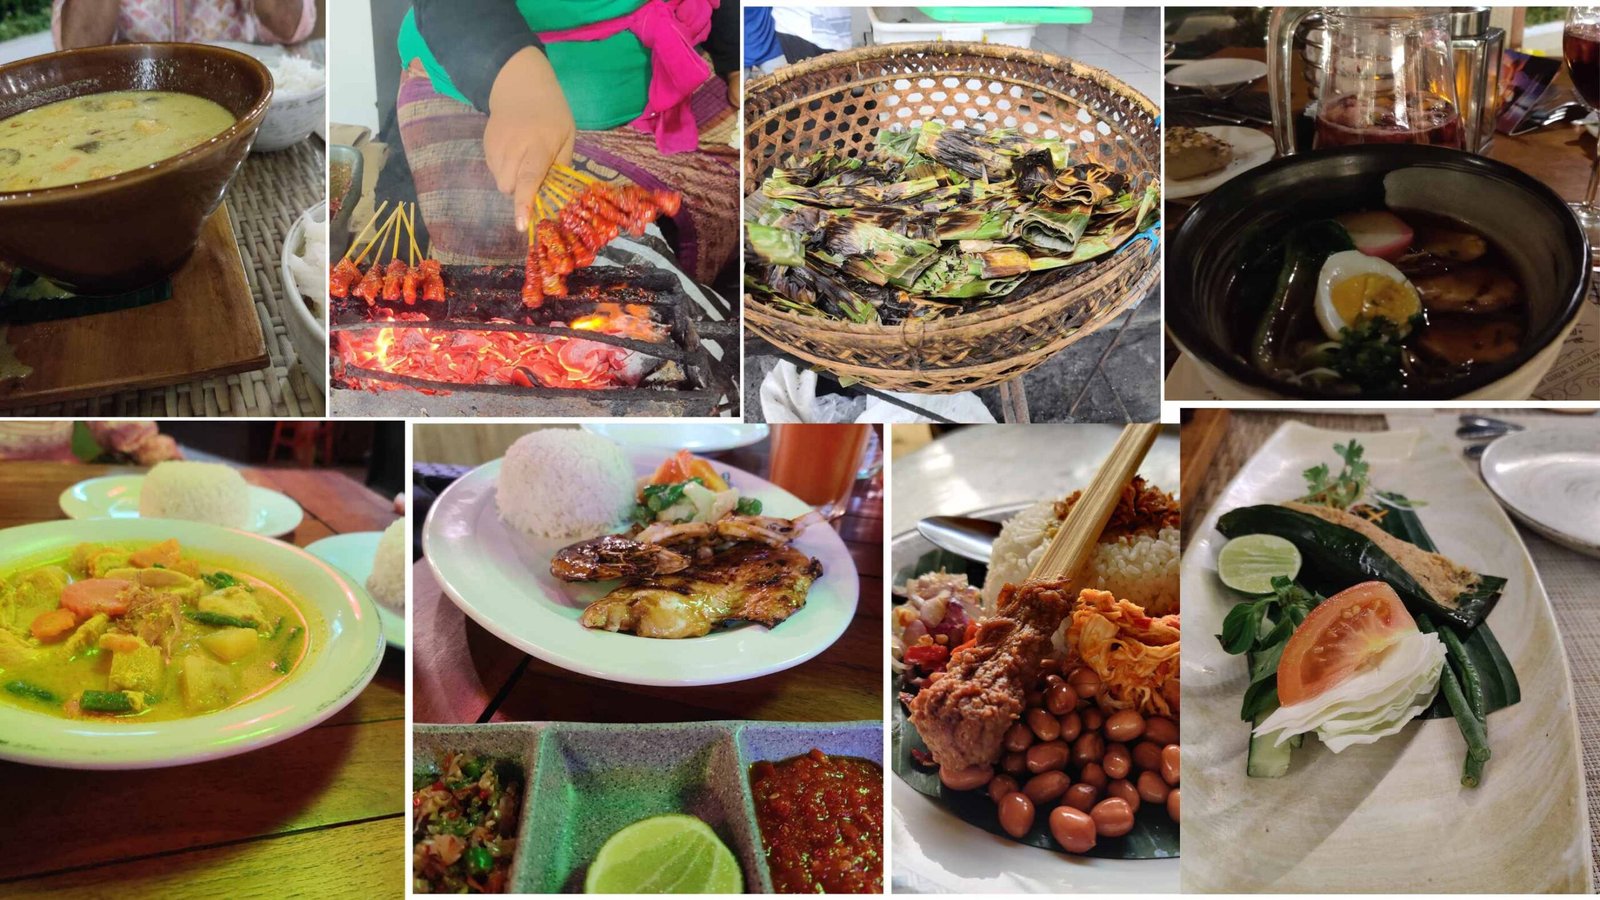 Bali tour with parents - A delectable collage of Balinese culinary delights enjoyed during the Bali tour with parents.